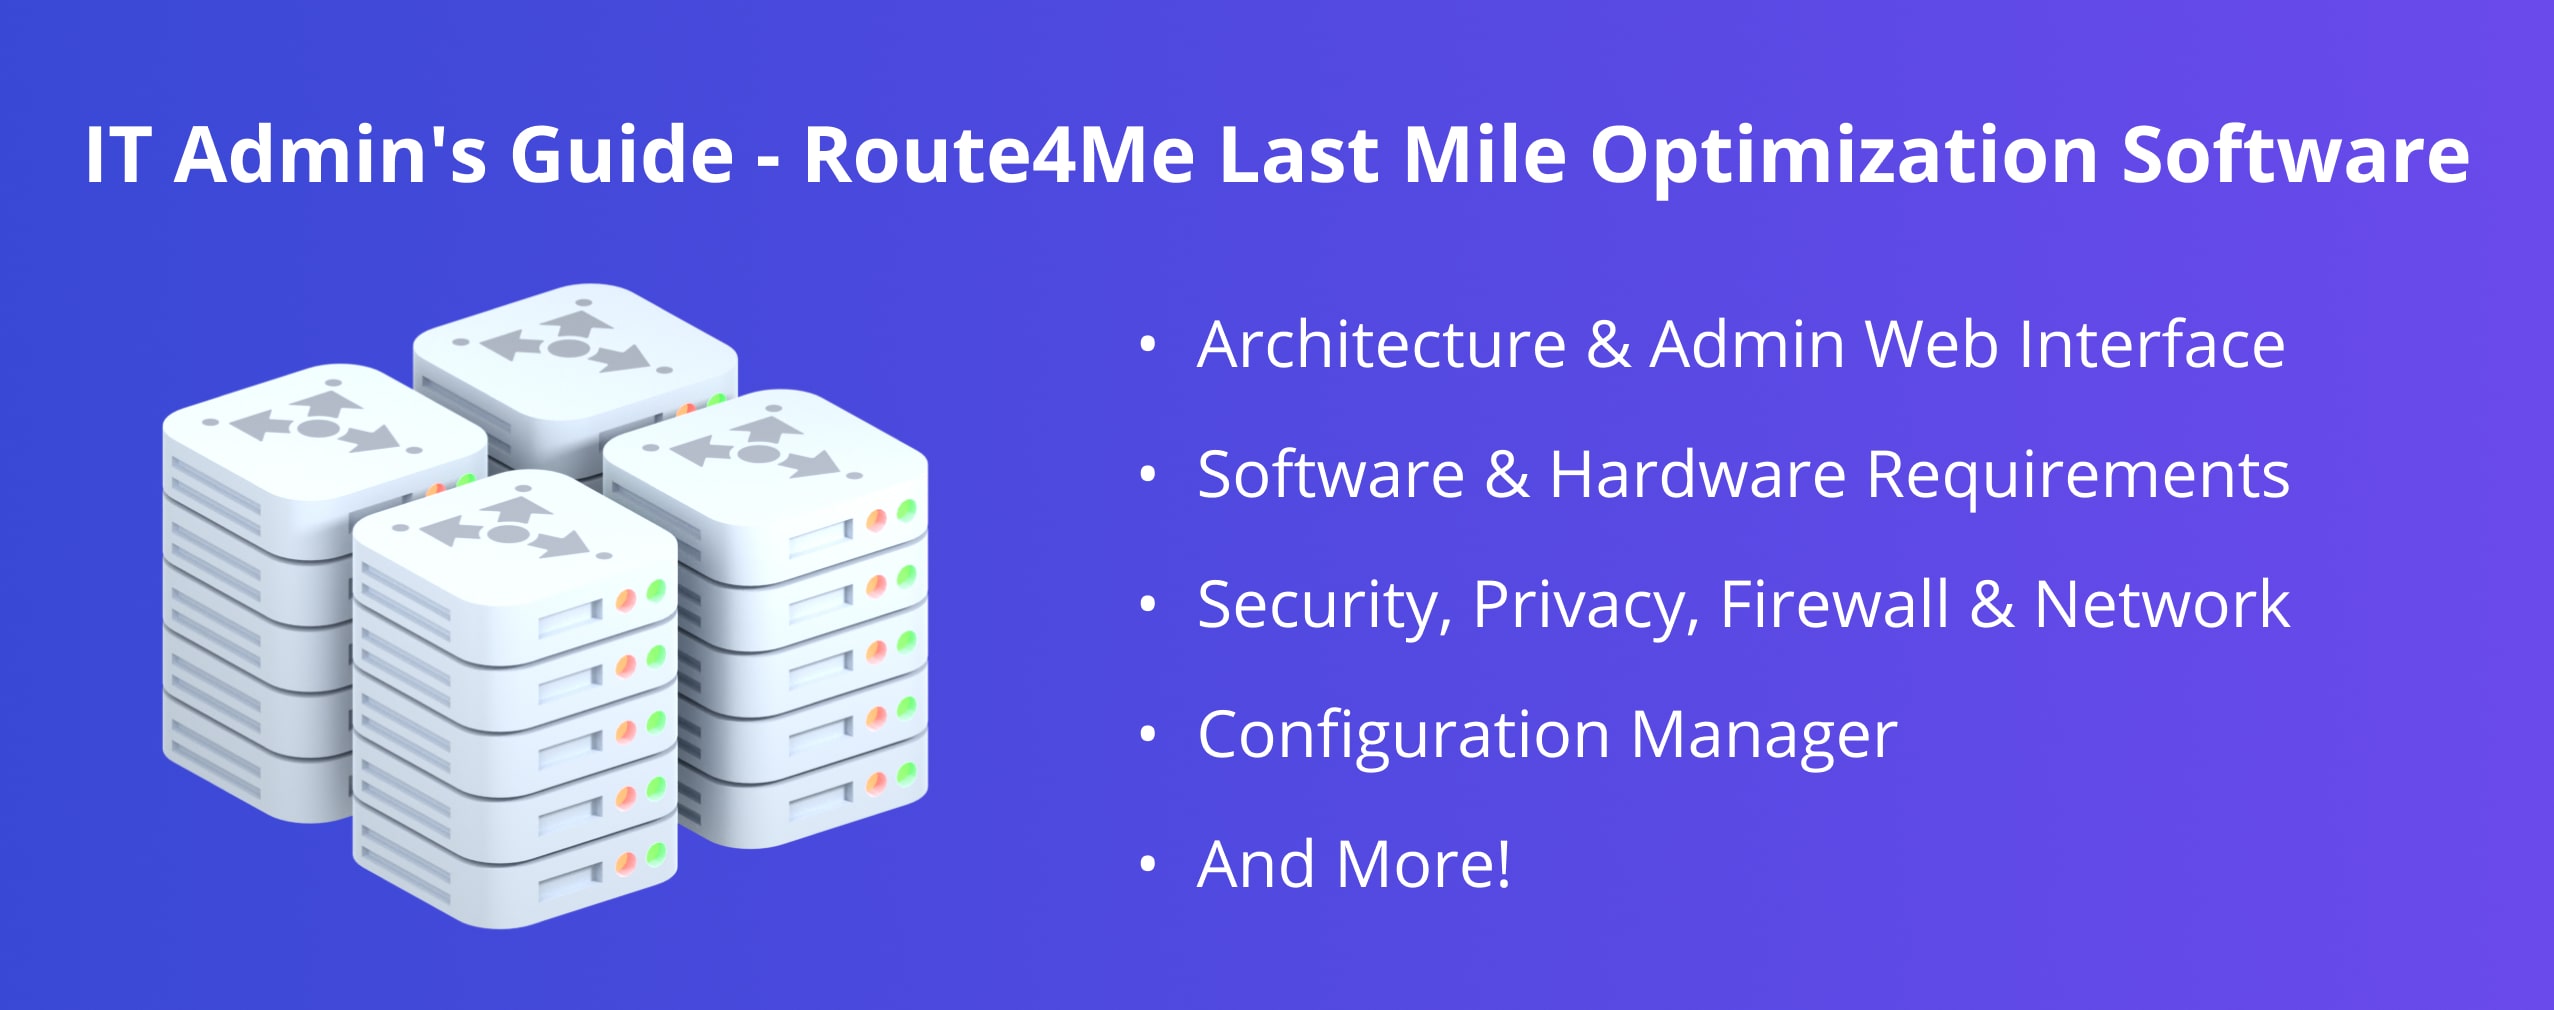 Route4Me Last Mile Optimization Software IT Admin's Guide: Web Platform, Mobile Apps, architecture, security and privacy, web interface, software and hardware, network, etc.